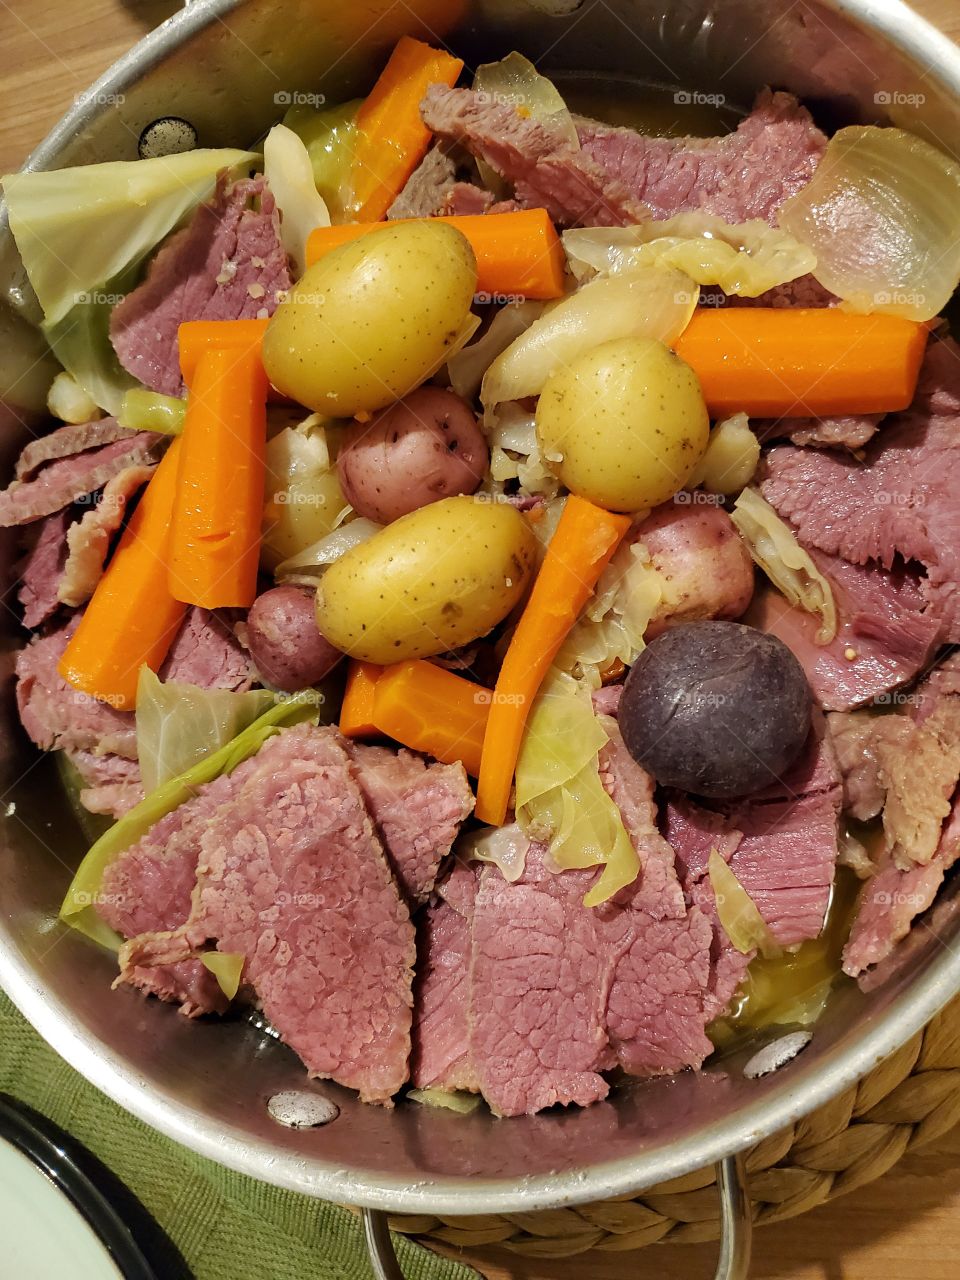 St. Patrick's Day Feast, Juicy sliced Corn Beef and Cabbage with mixed colored potatoes and carrots. One pot meal.